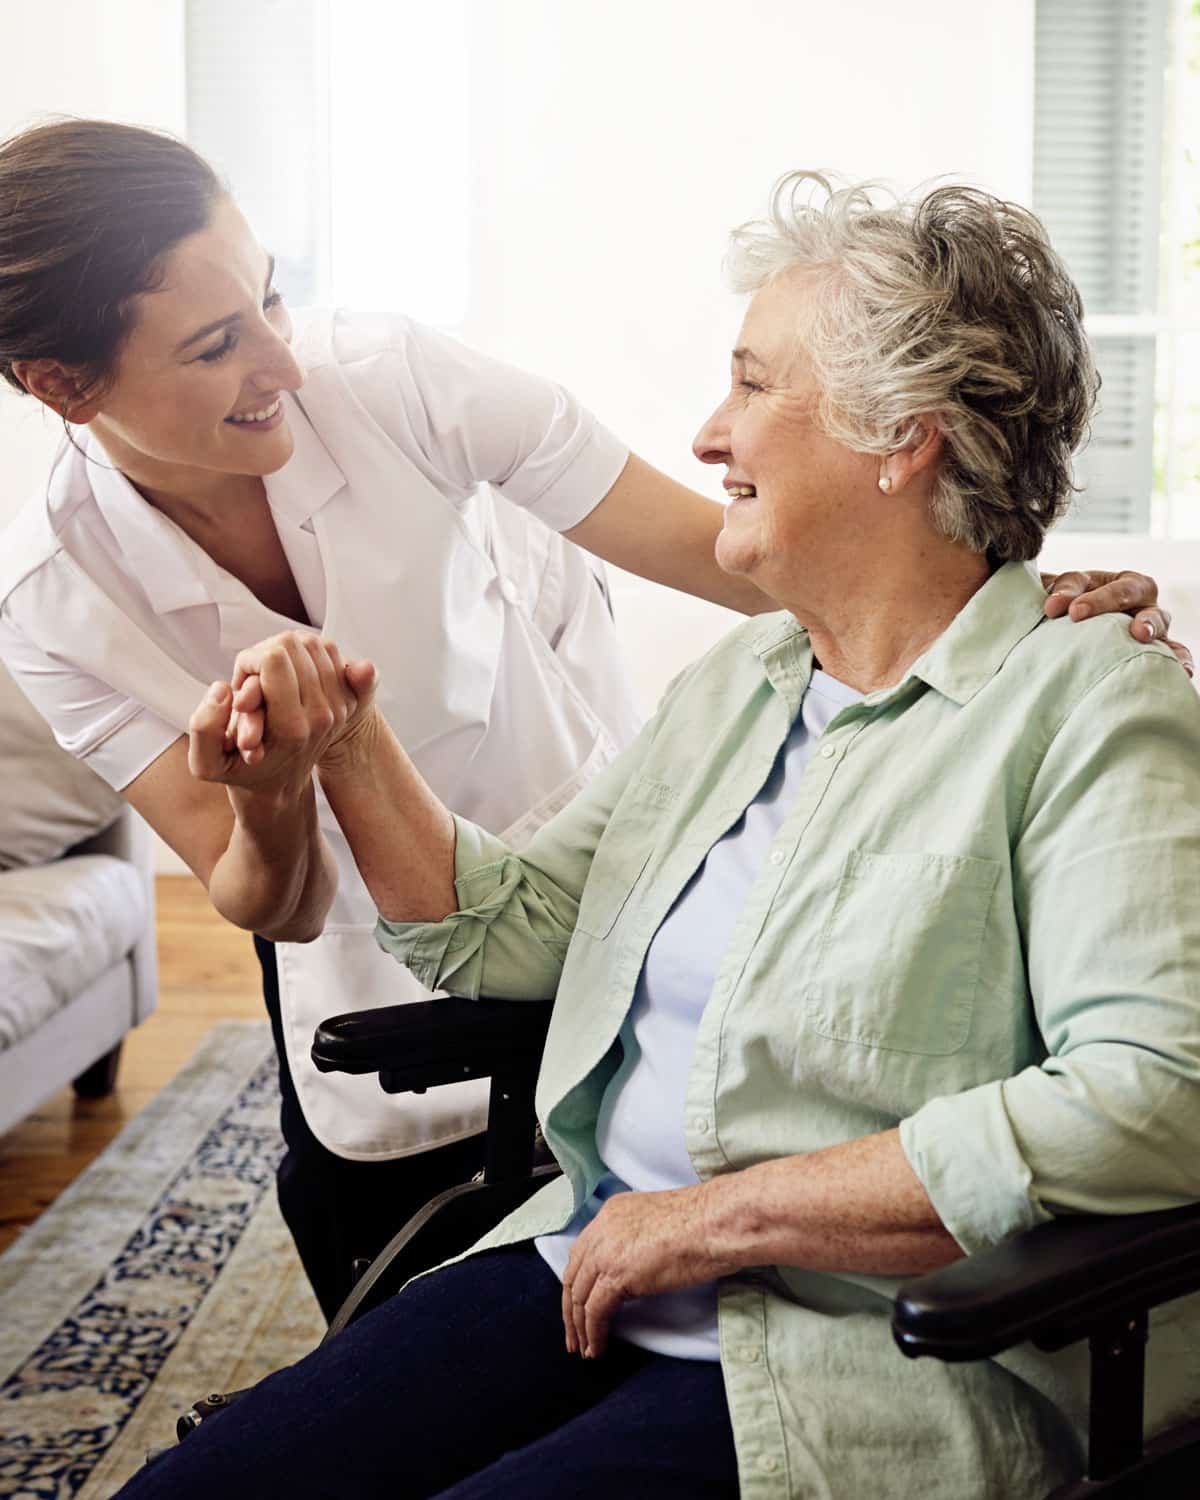 An Elderly woman talking with a care giver